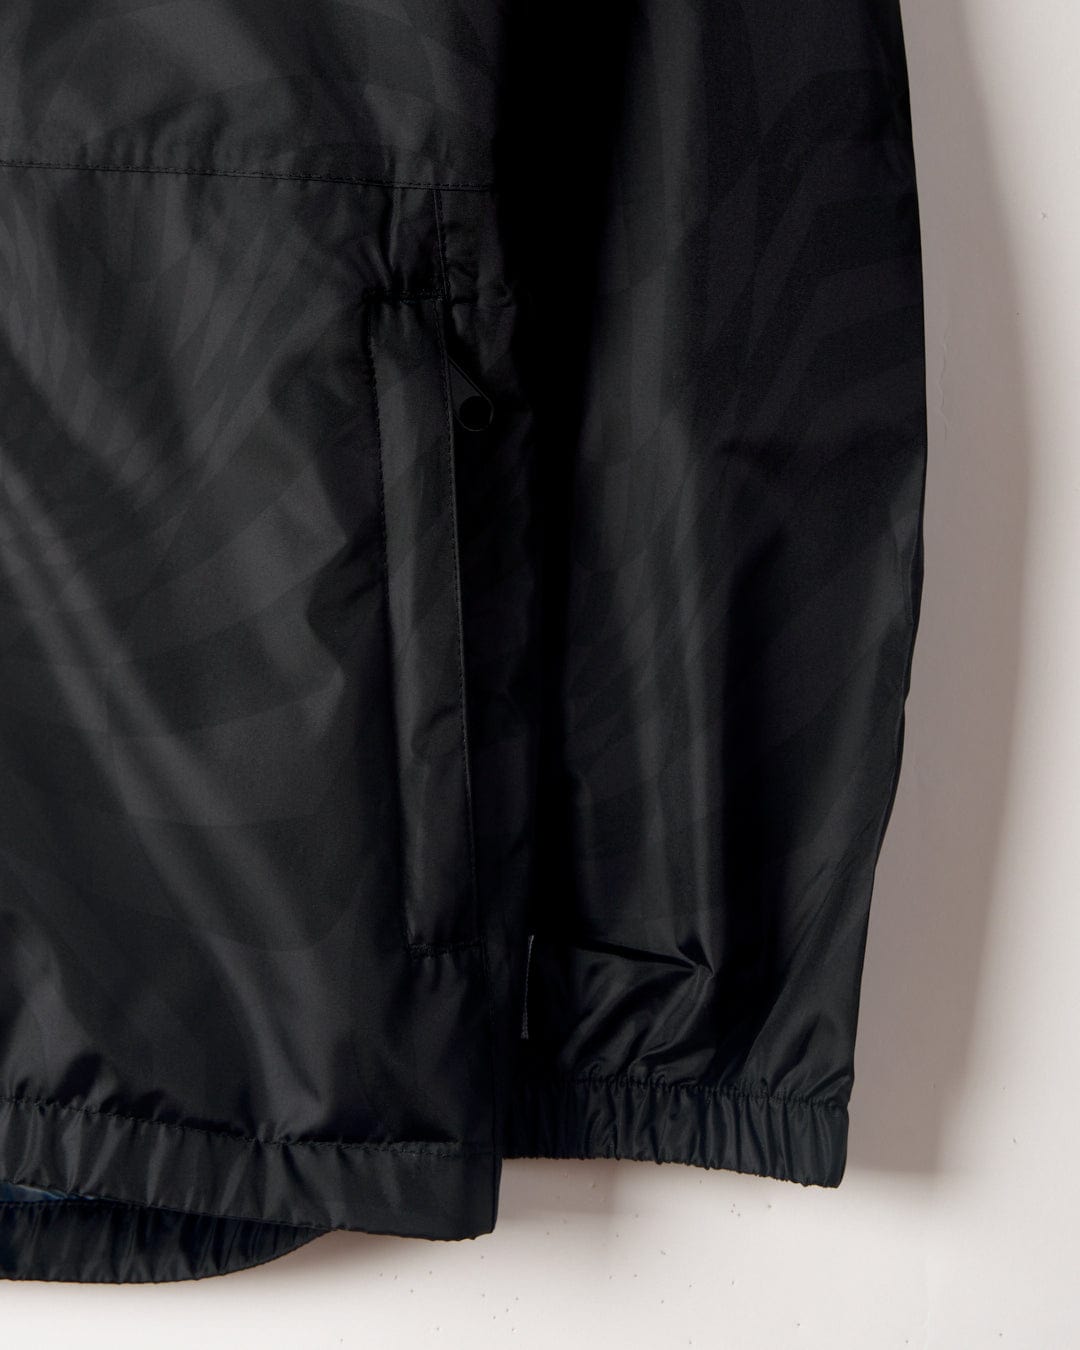 Close-up of a Warped - Kids Waterproof Packable Jacket in Black by Saltrock showing detail of the fabric and side pocket with an elastic hem.